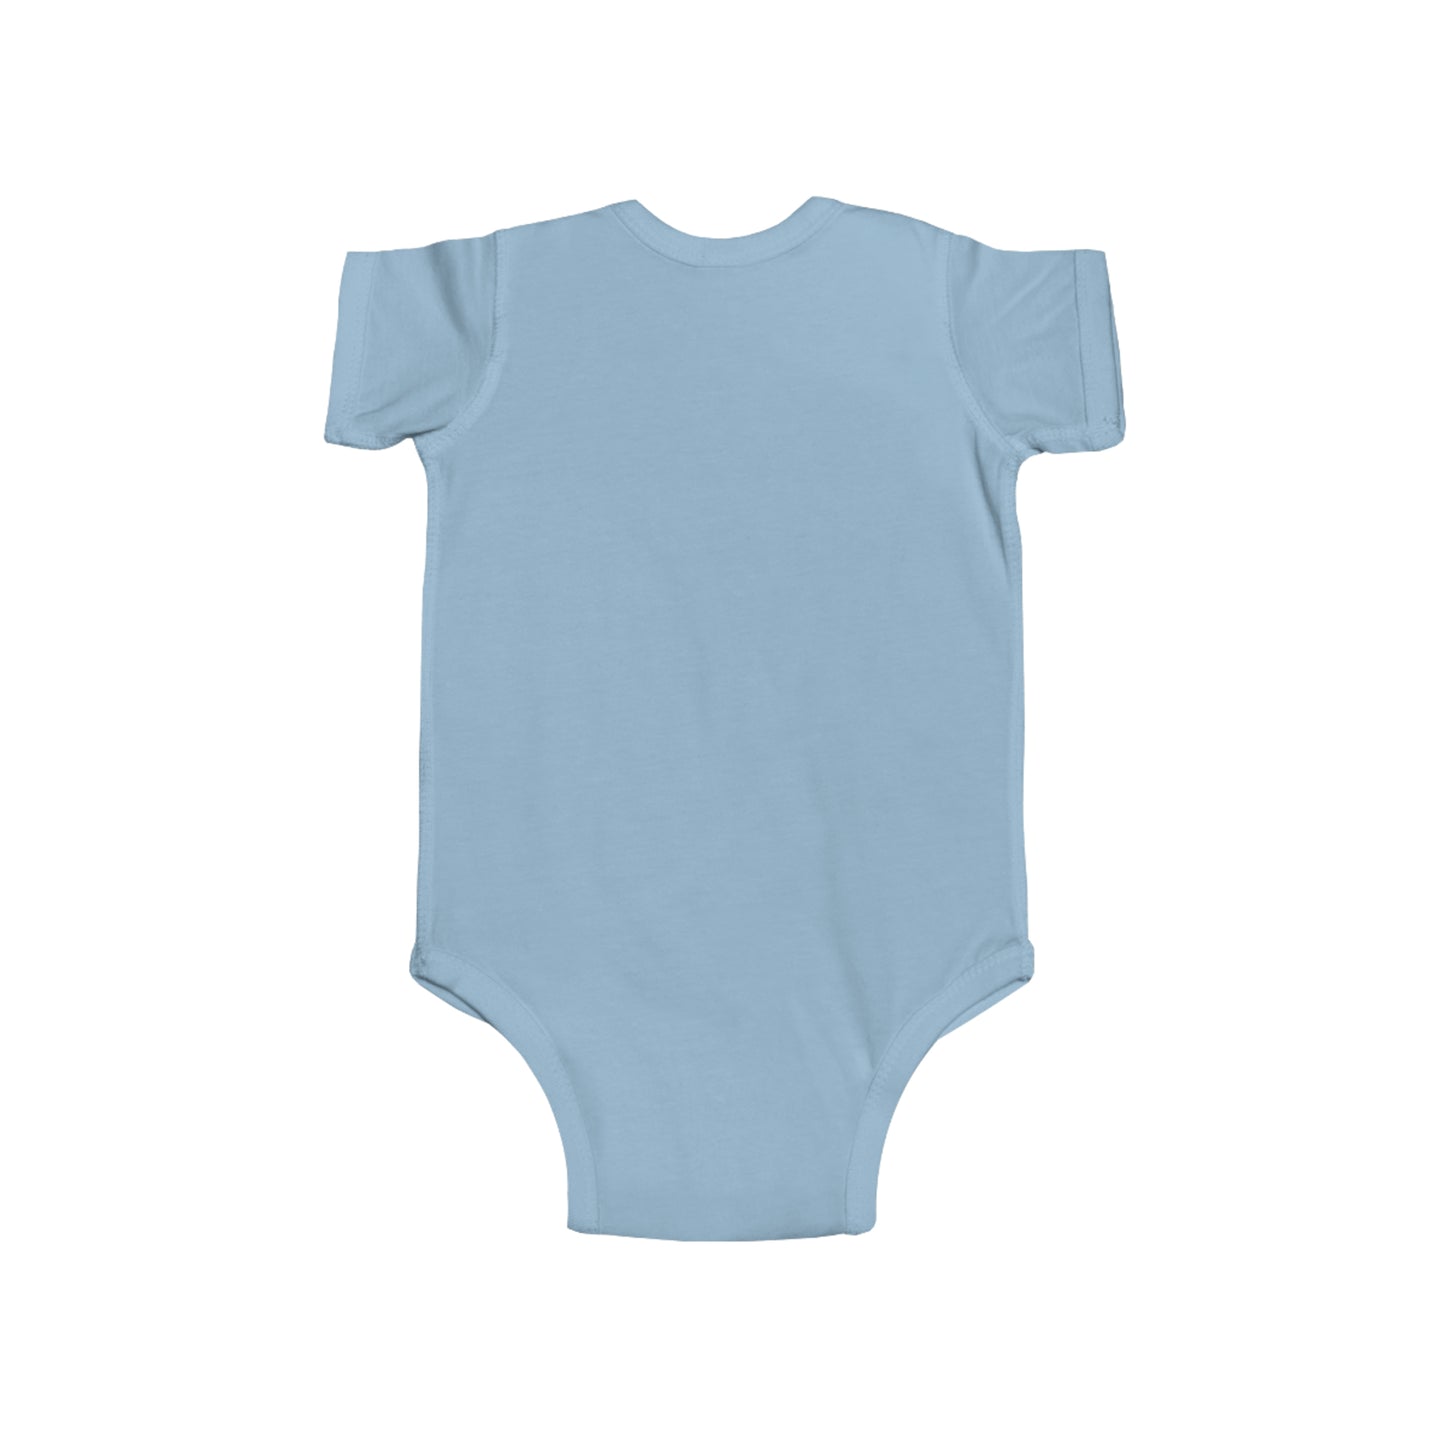 Love, FRAGILE, Handle With Care- Baby, Infant, Toddler, Soft Cotton, Onesie